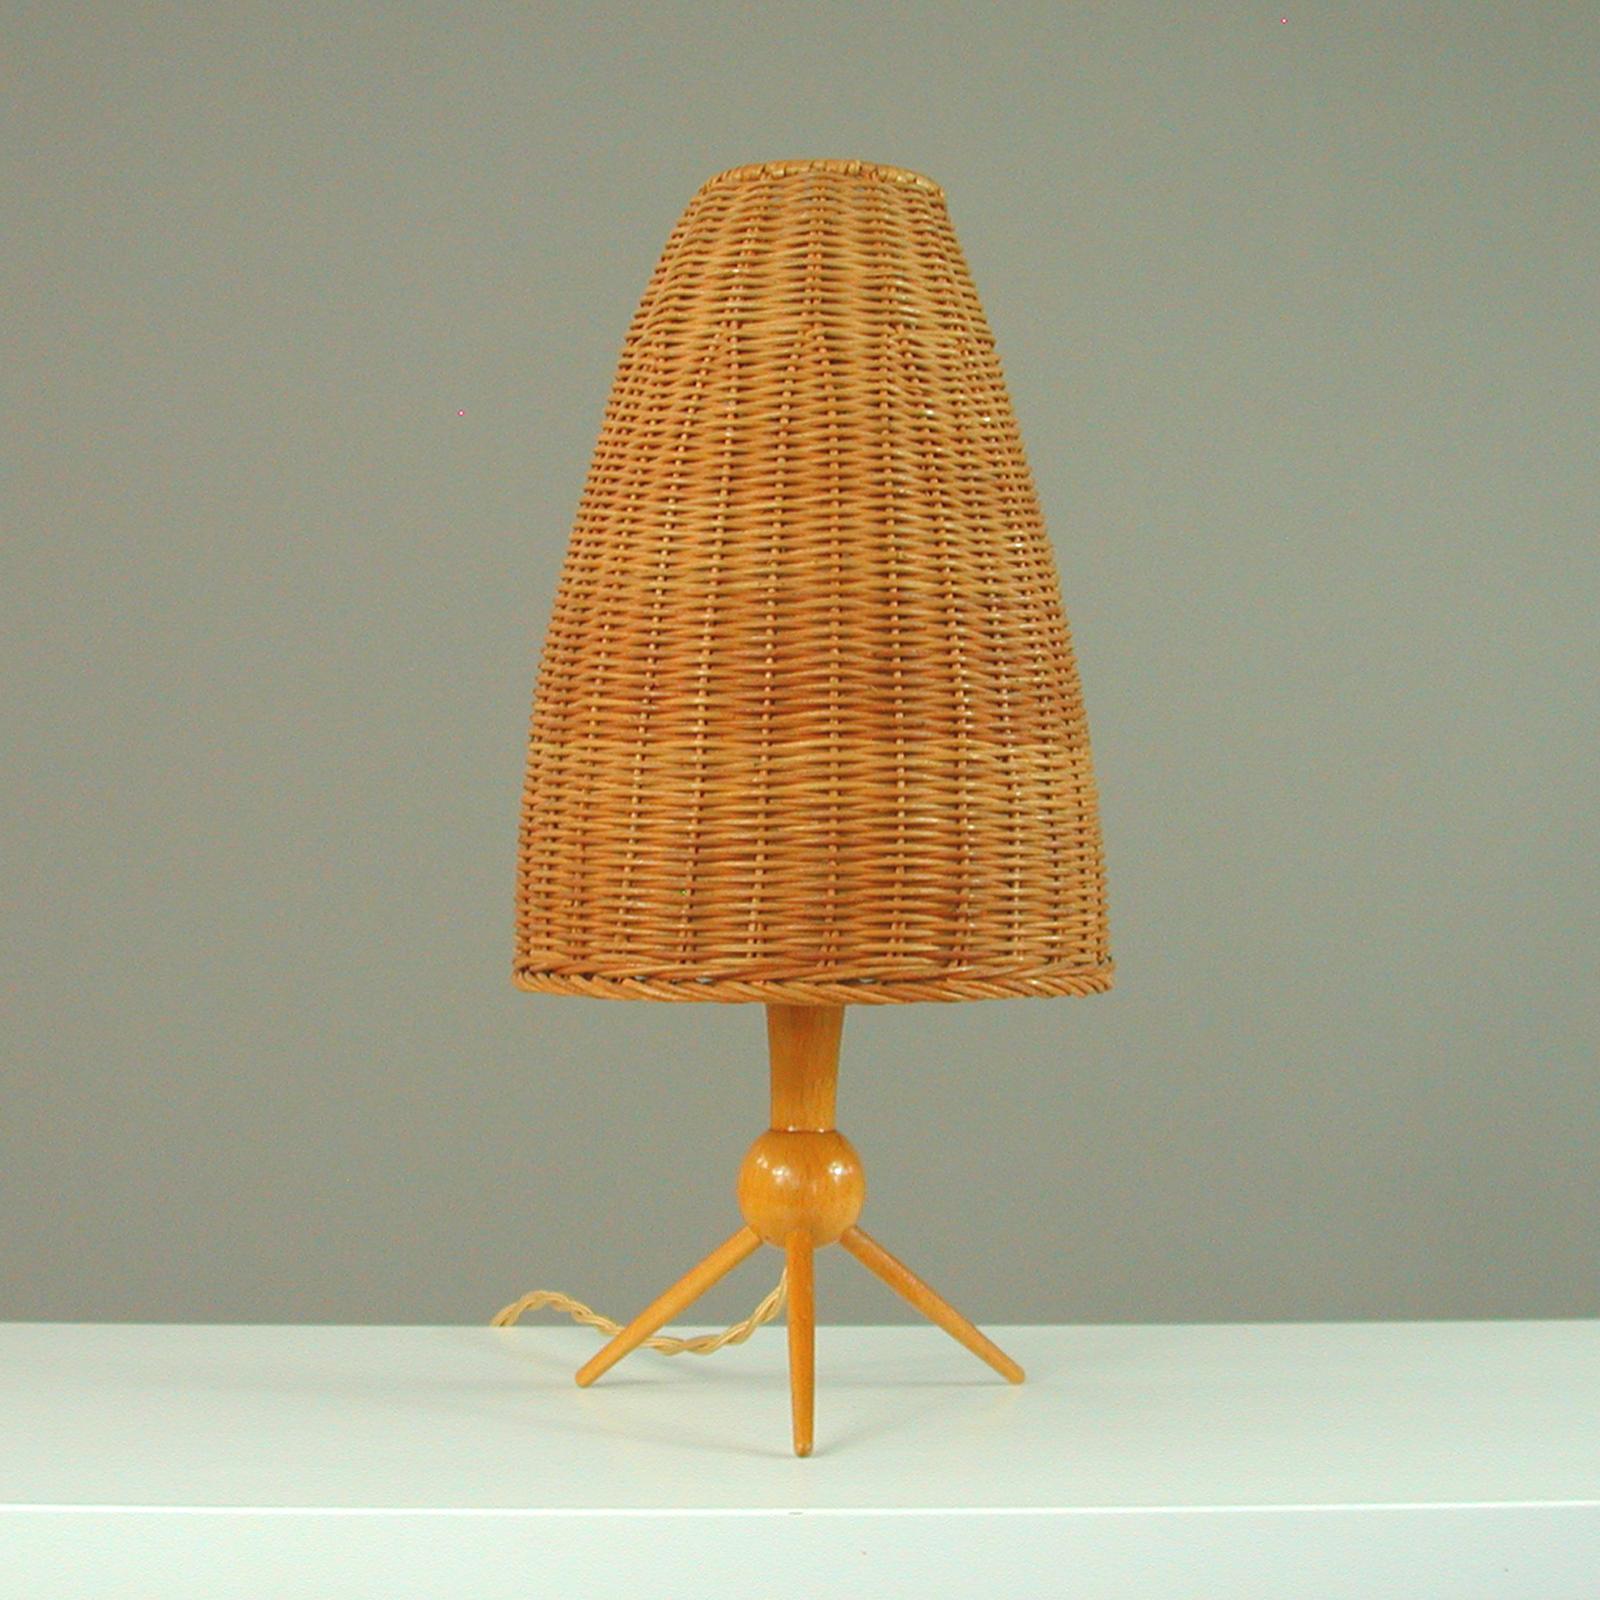 This elegant Scandinavian Modern table lamp was designed and manufactured in Sweden in the 1950s. It features a teak tripod base with a rattan conical lampshade and requires a E27 bulb.

An awesome design with period style tapered teak stem and